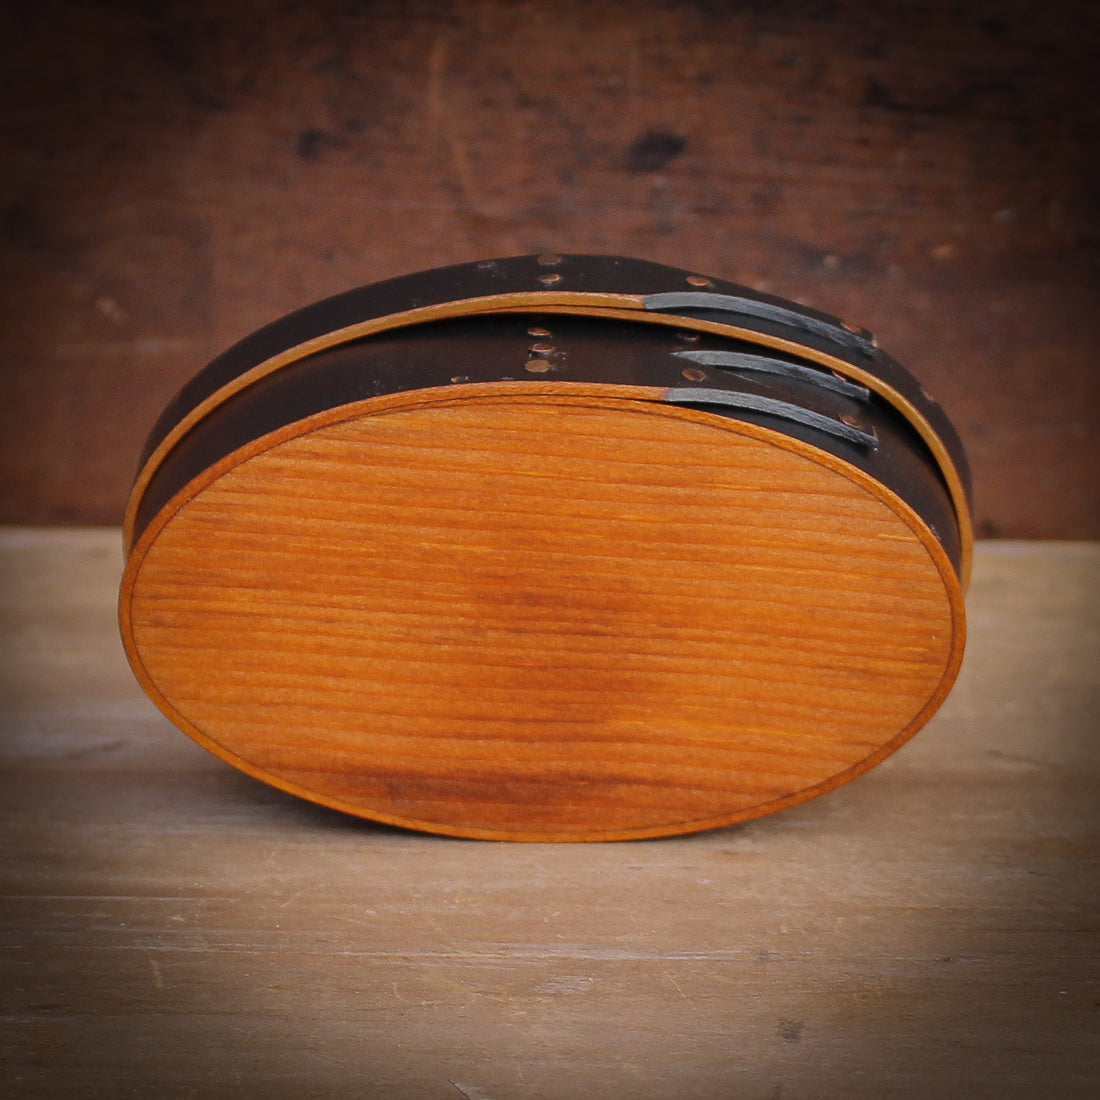 Shaker Oval Box, Size #0, LeHays Shaker Boxes, Handcrafted in Maine.  Bottom View